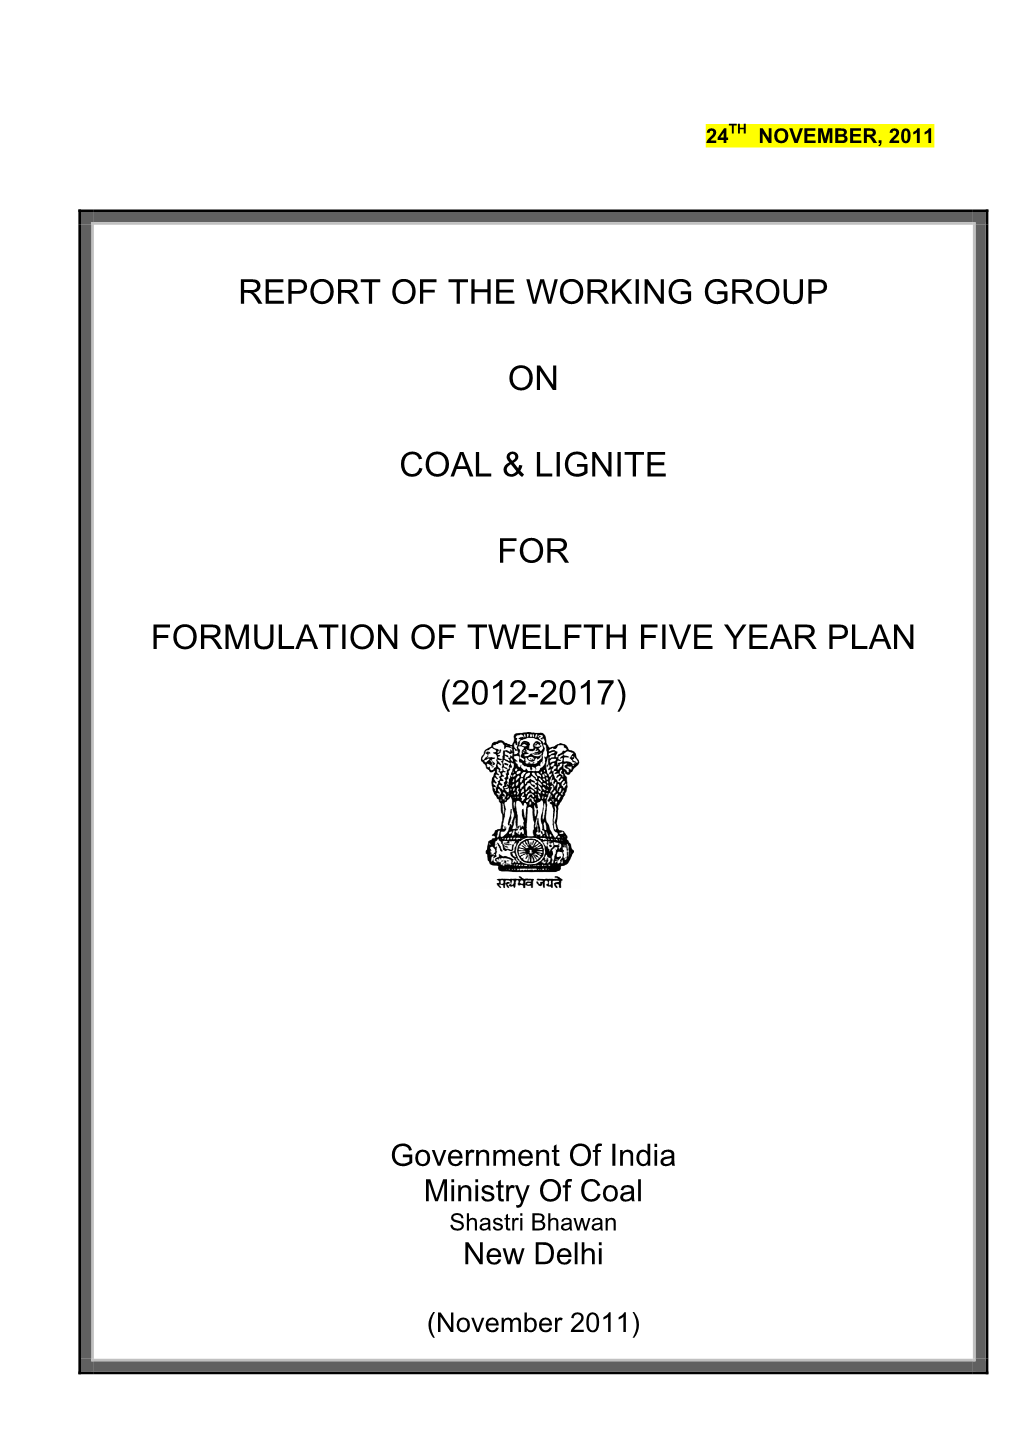 Report of the Working Group on Coal & Lignite for Formulation of Twelfth Five Year Plan (2012-2017)